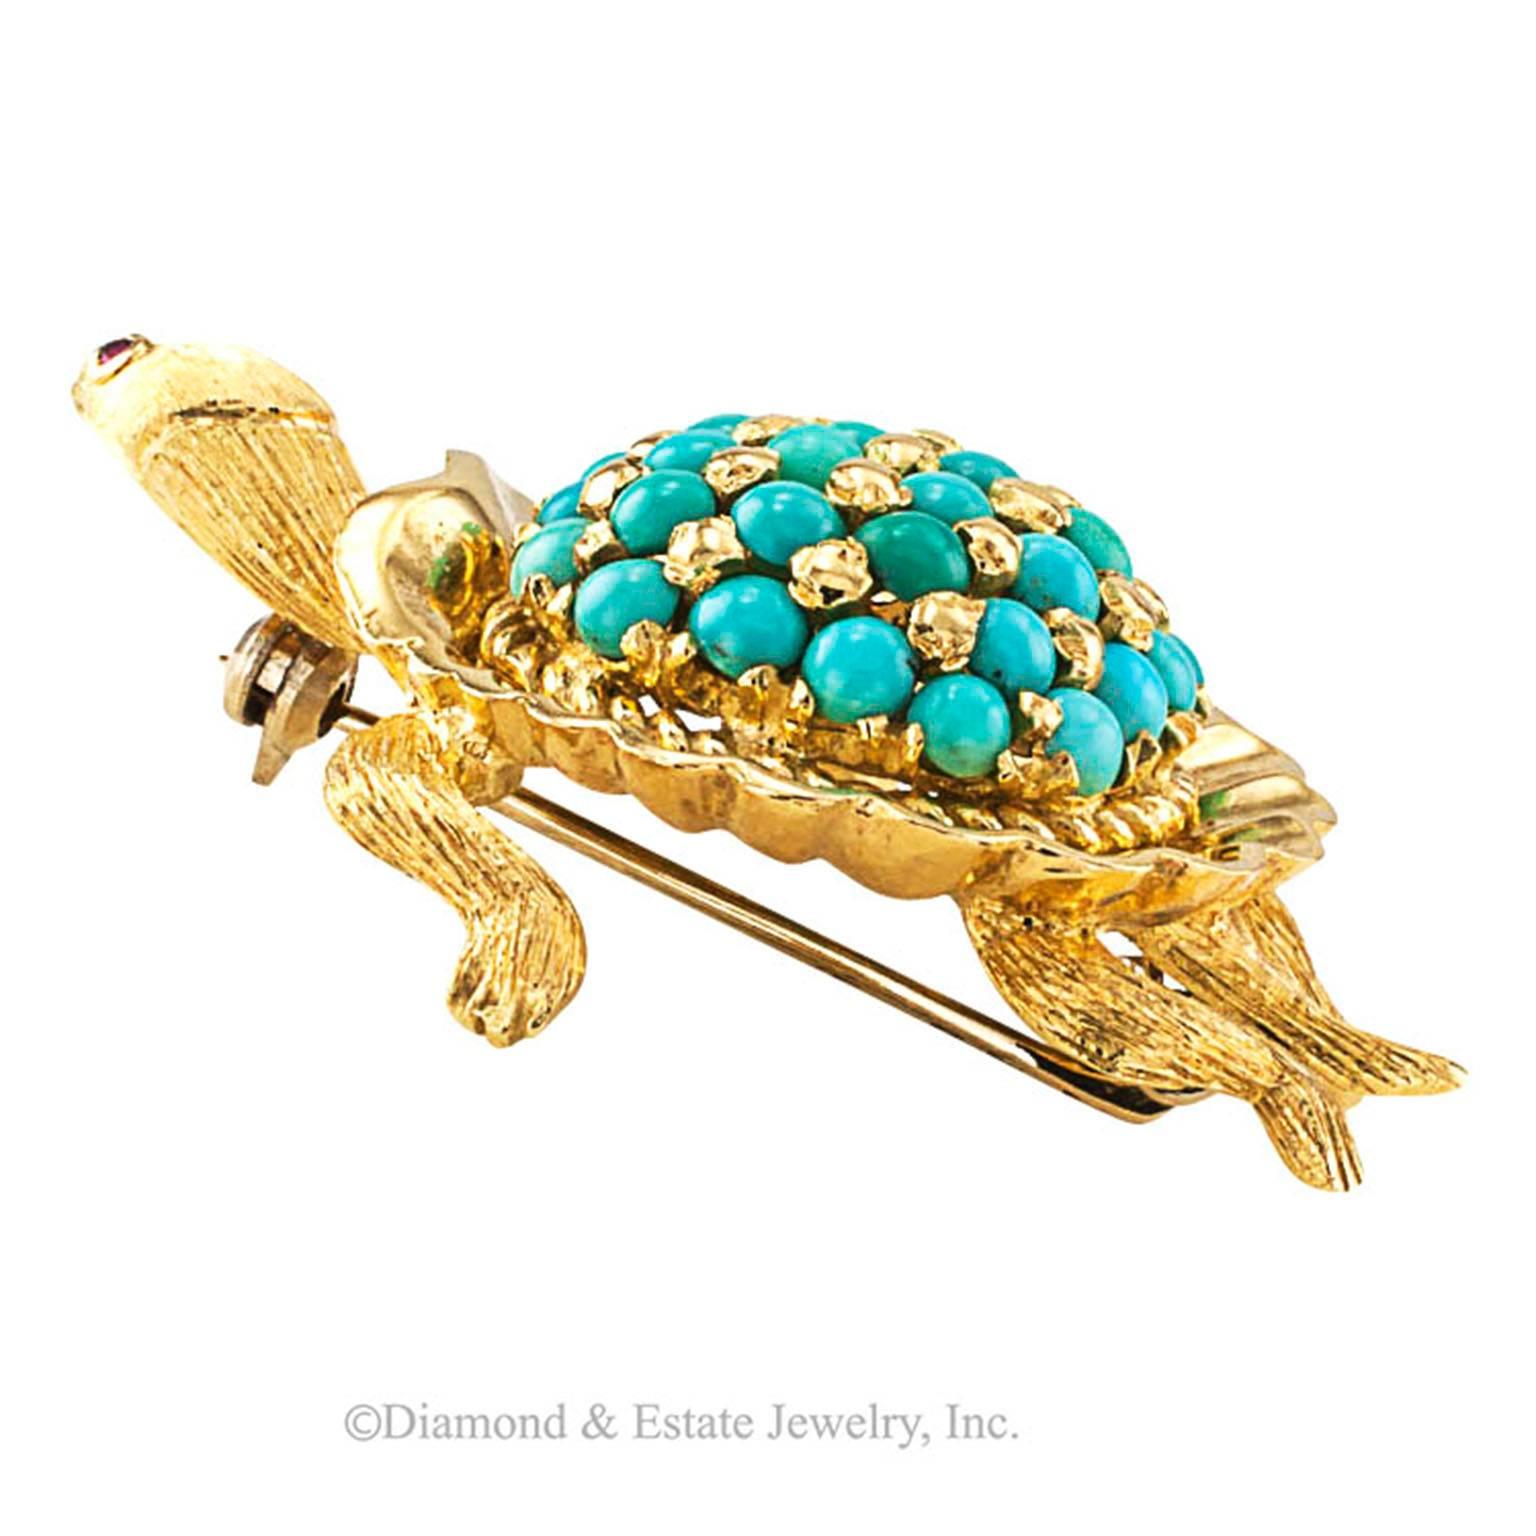 Turquoise and Ruby Sea Turtle Brooch Circa 1960

It is so easy to fall in love with sea turtles... seeing them in their own environment they appear so graceful, as if effortlessly flying through the water, and they are so colorful too.  This 18